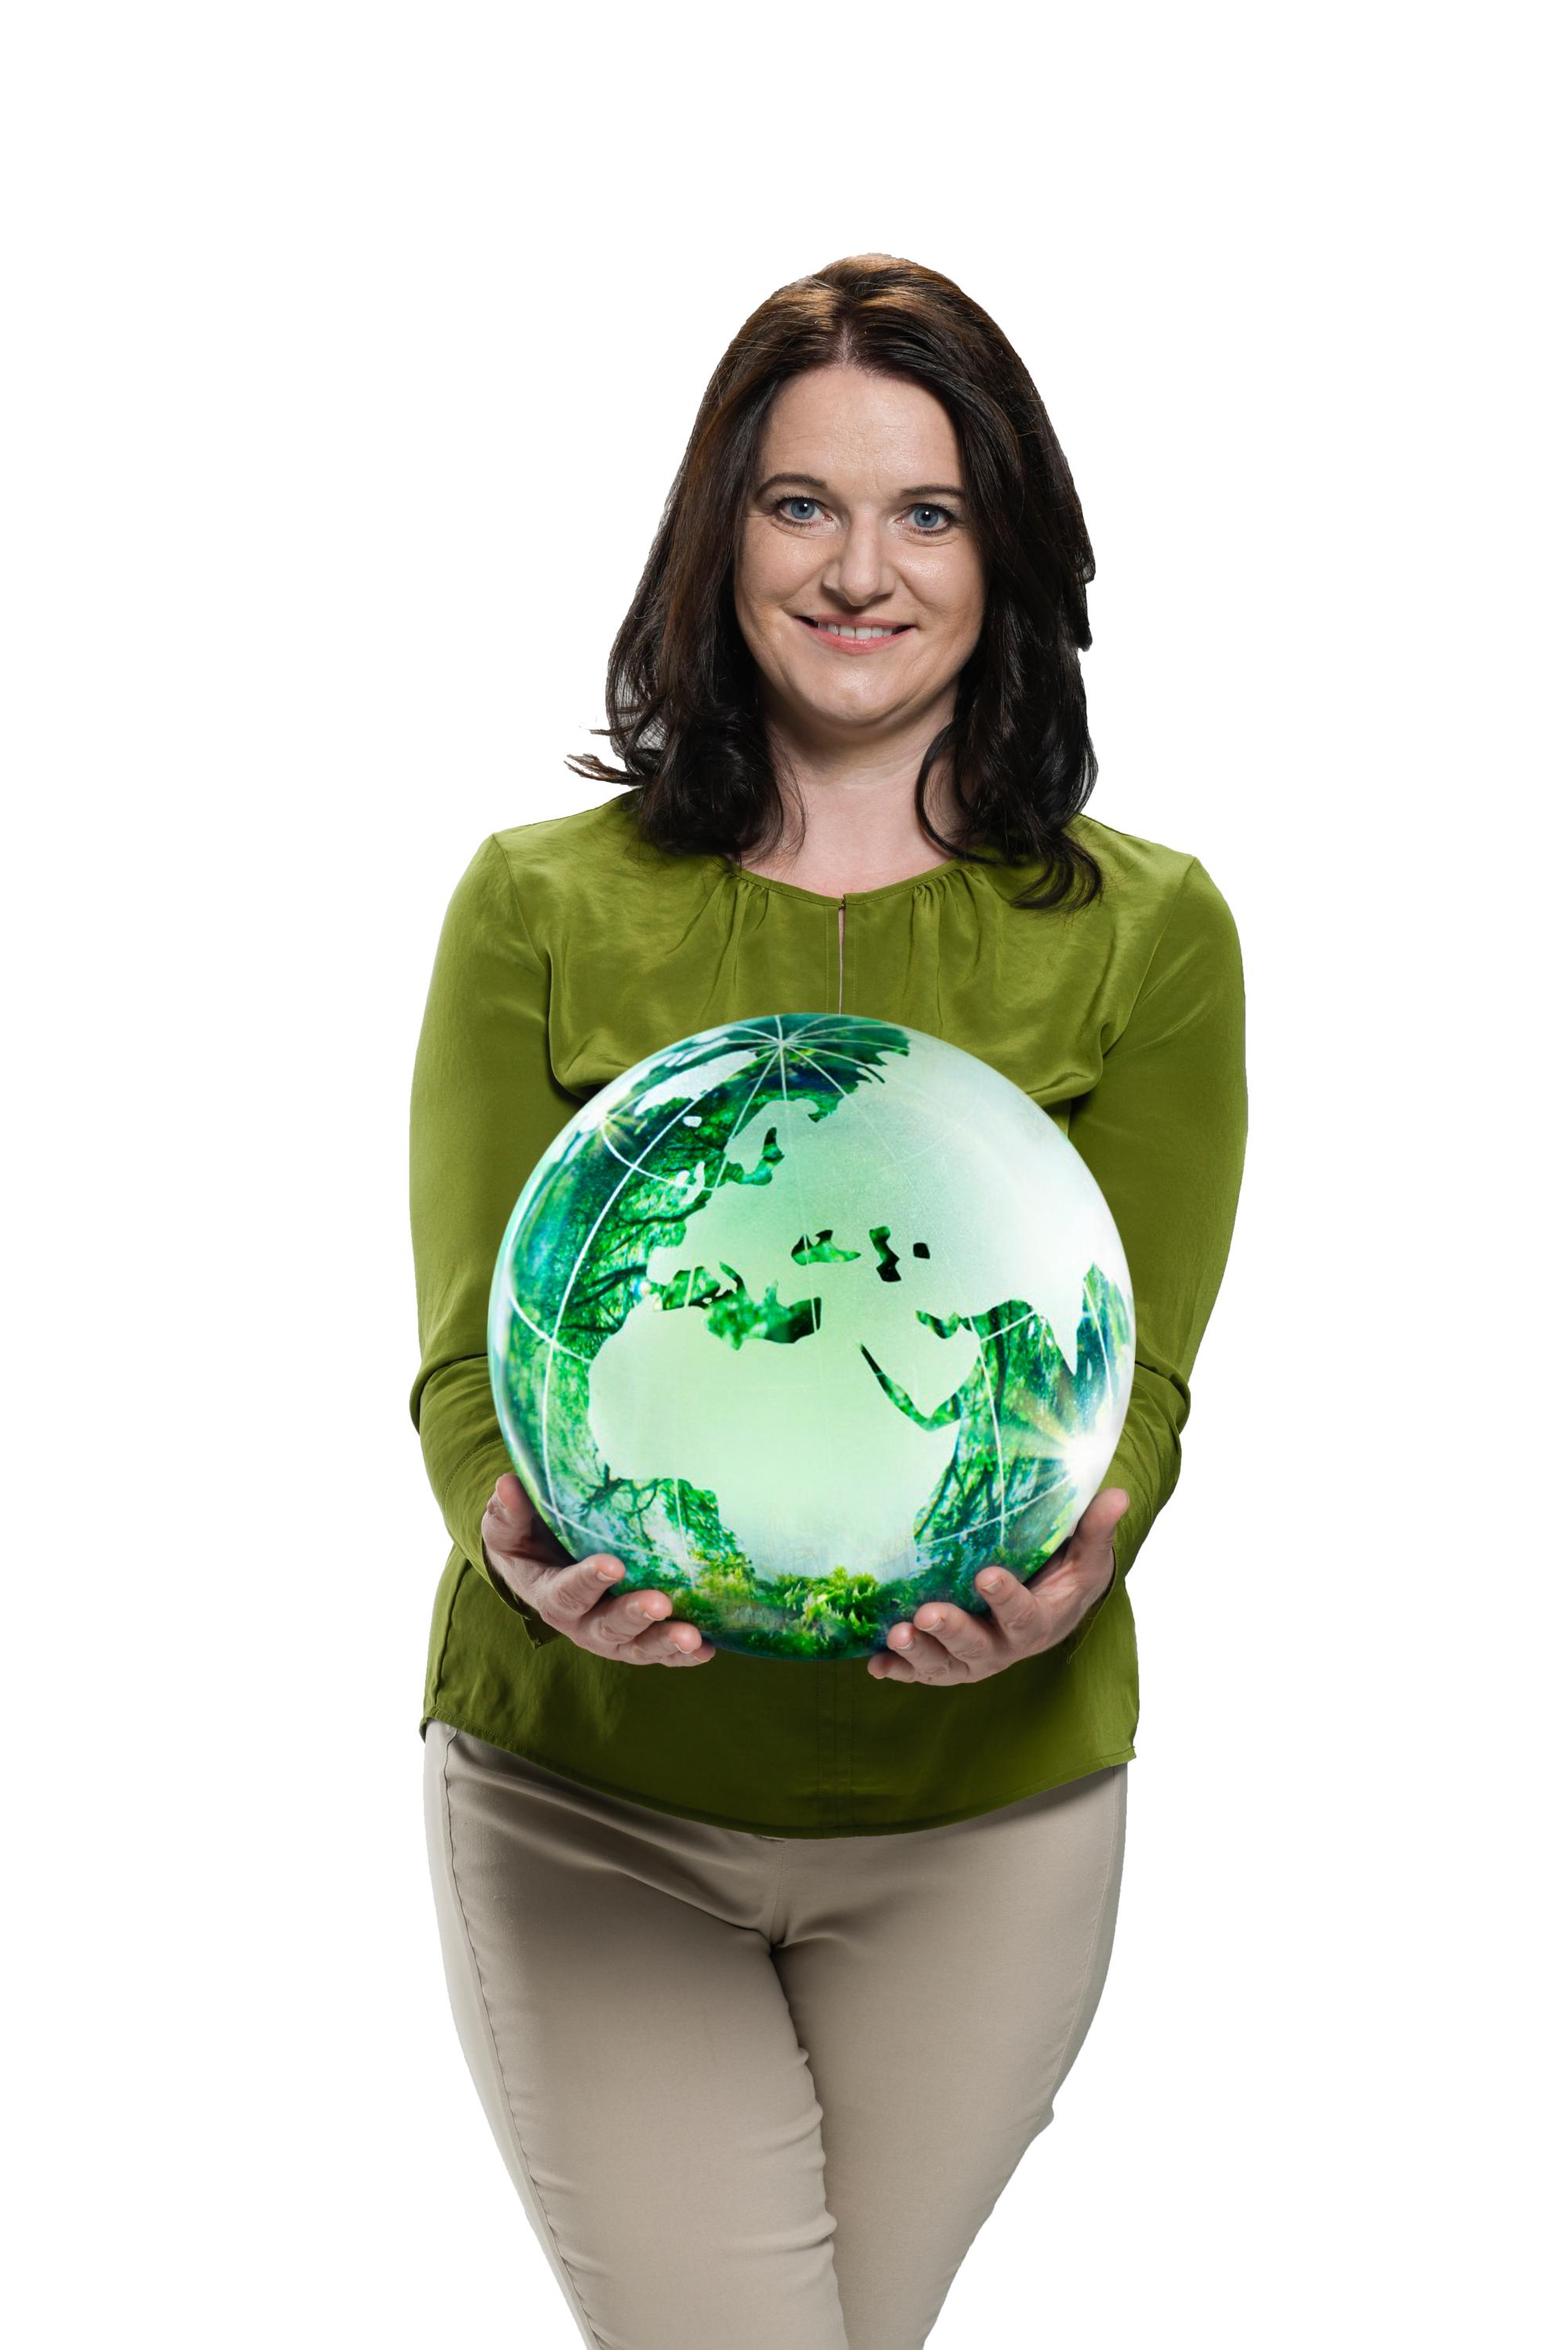 Portrait of Stefanie Rud holding a globe in her hands.